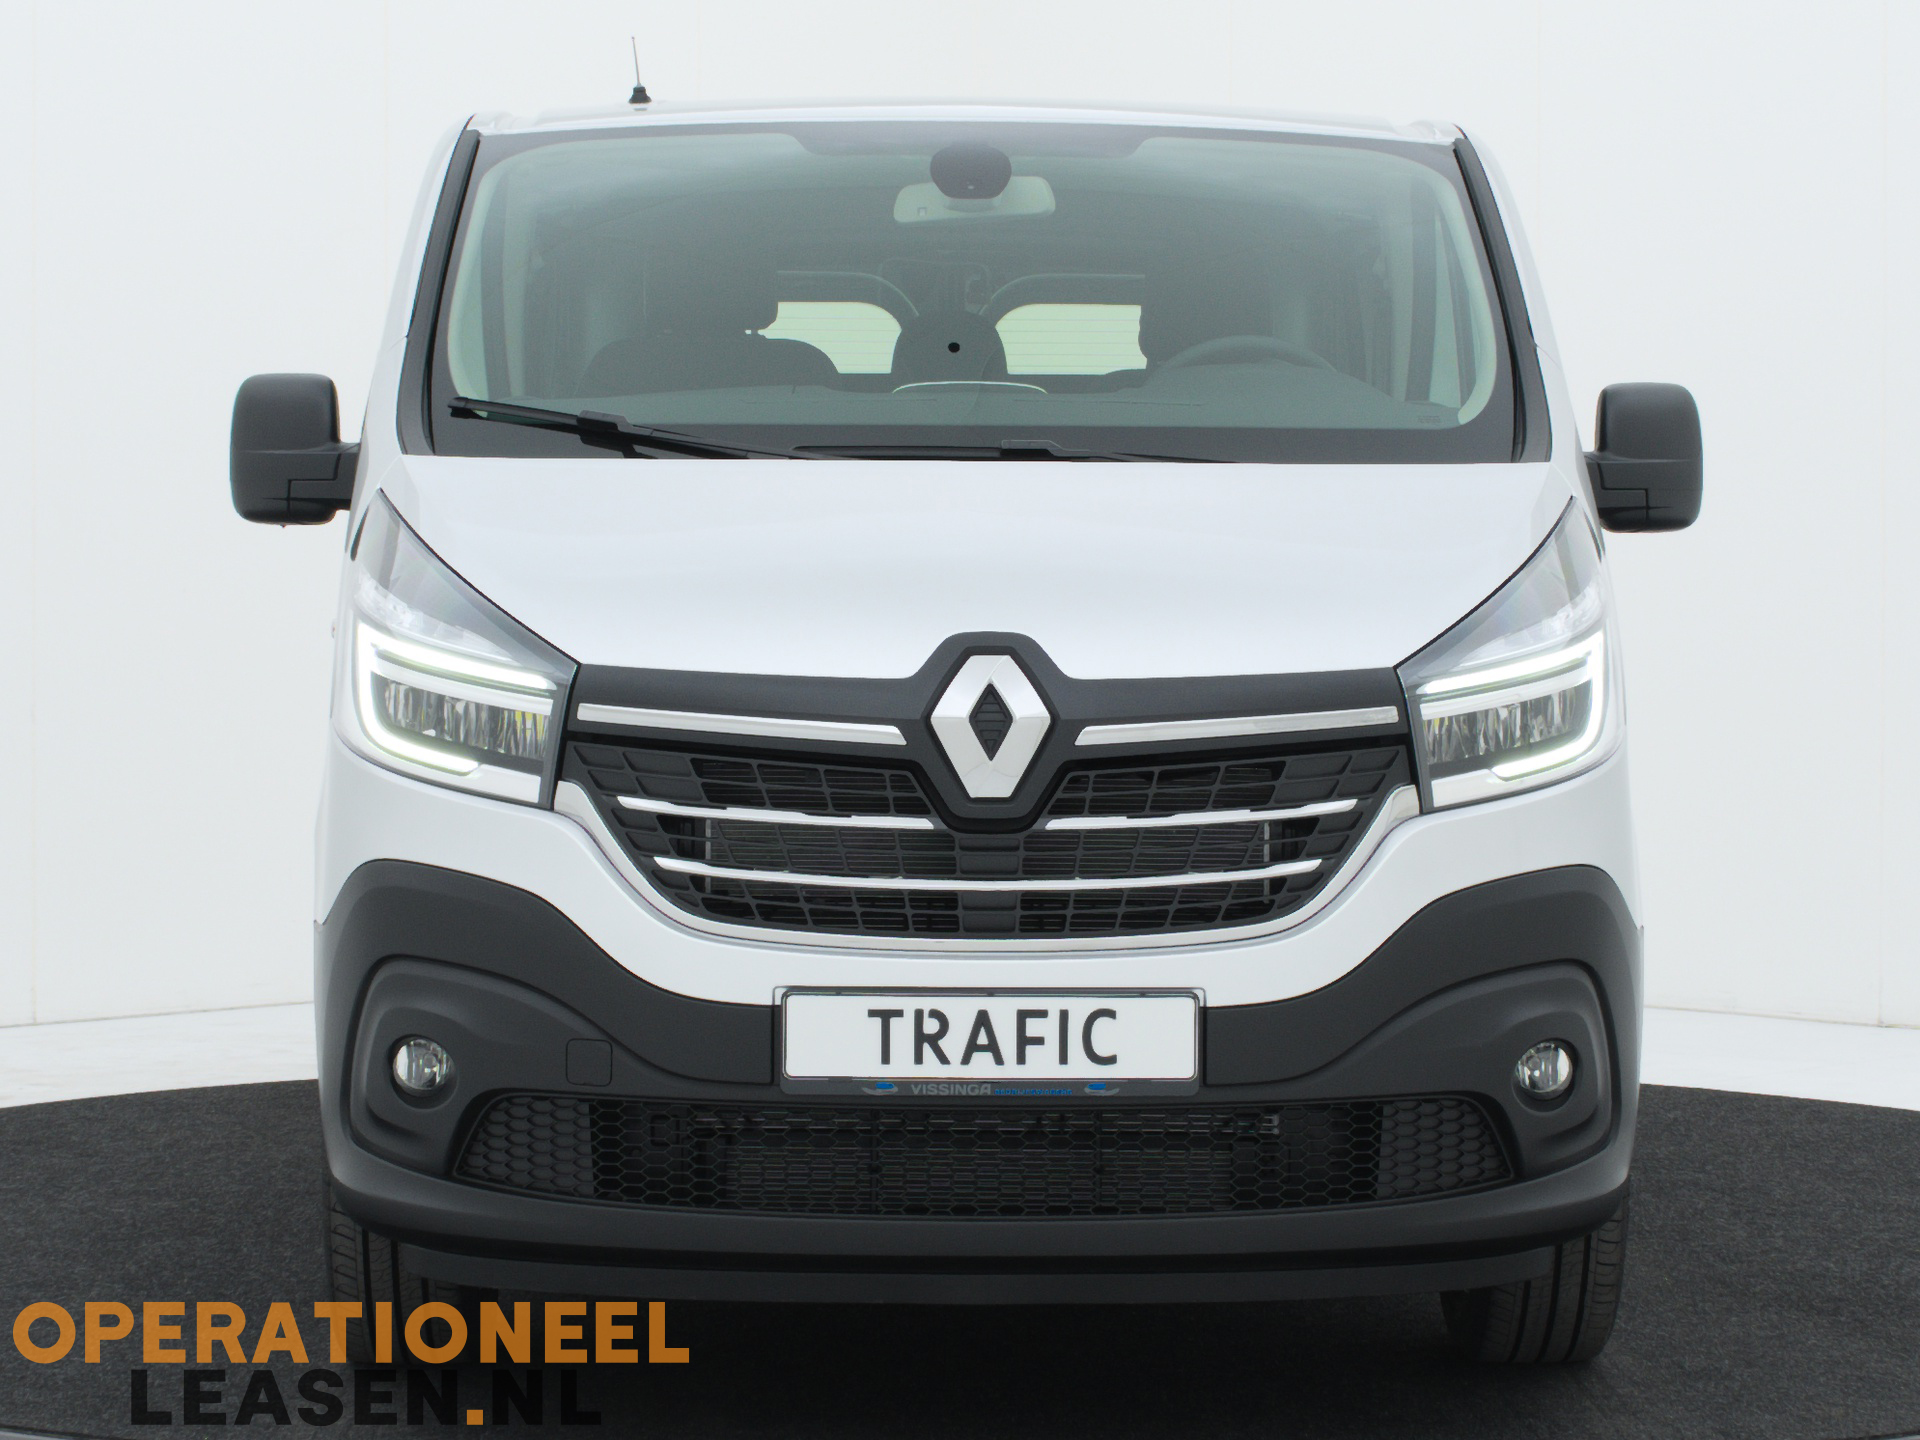 Operational lease Renault master traffic-10